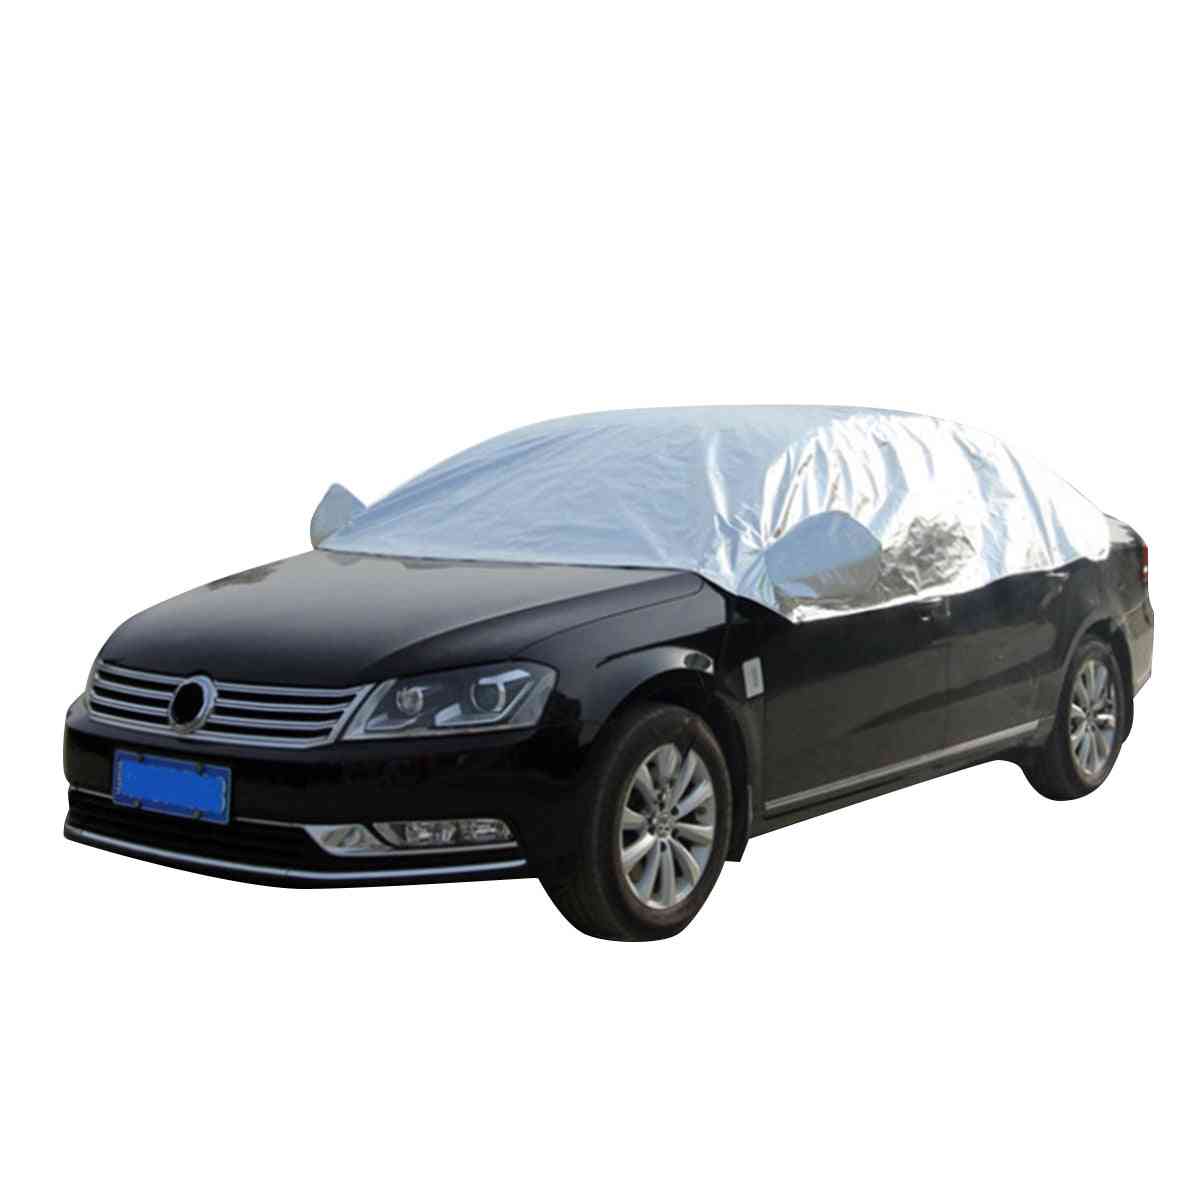 Uv Protection Dust Proof Car Cover With Wind-proof Hooks Suction Cups